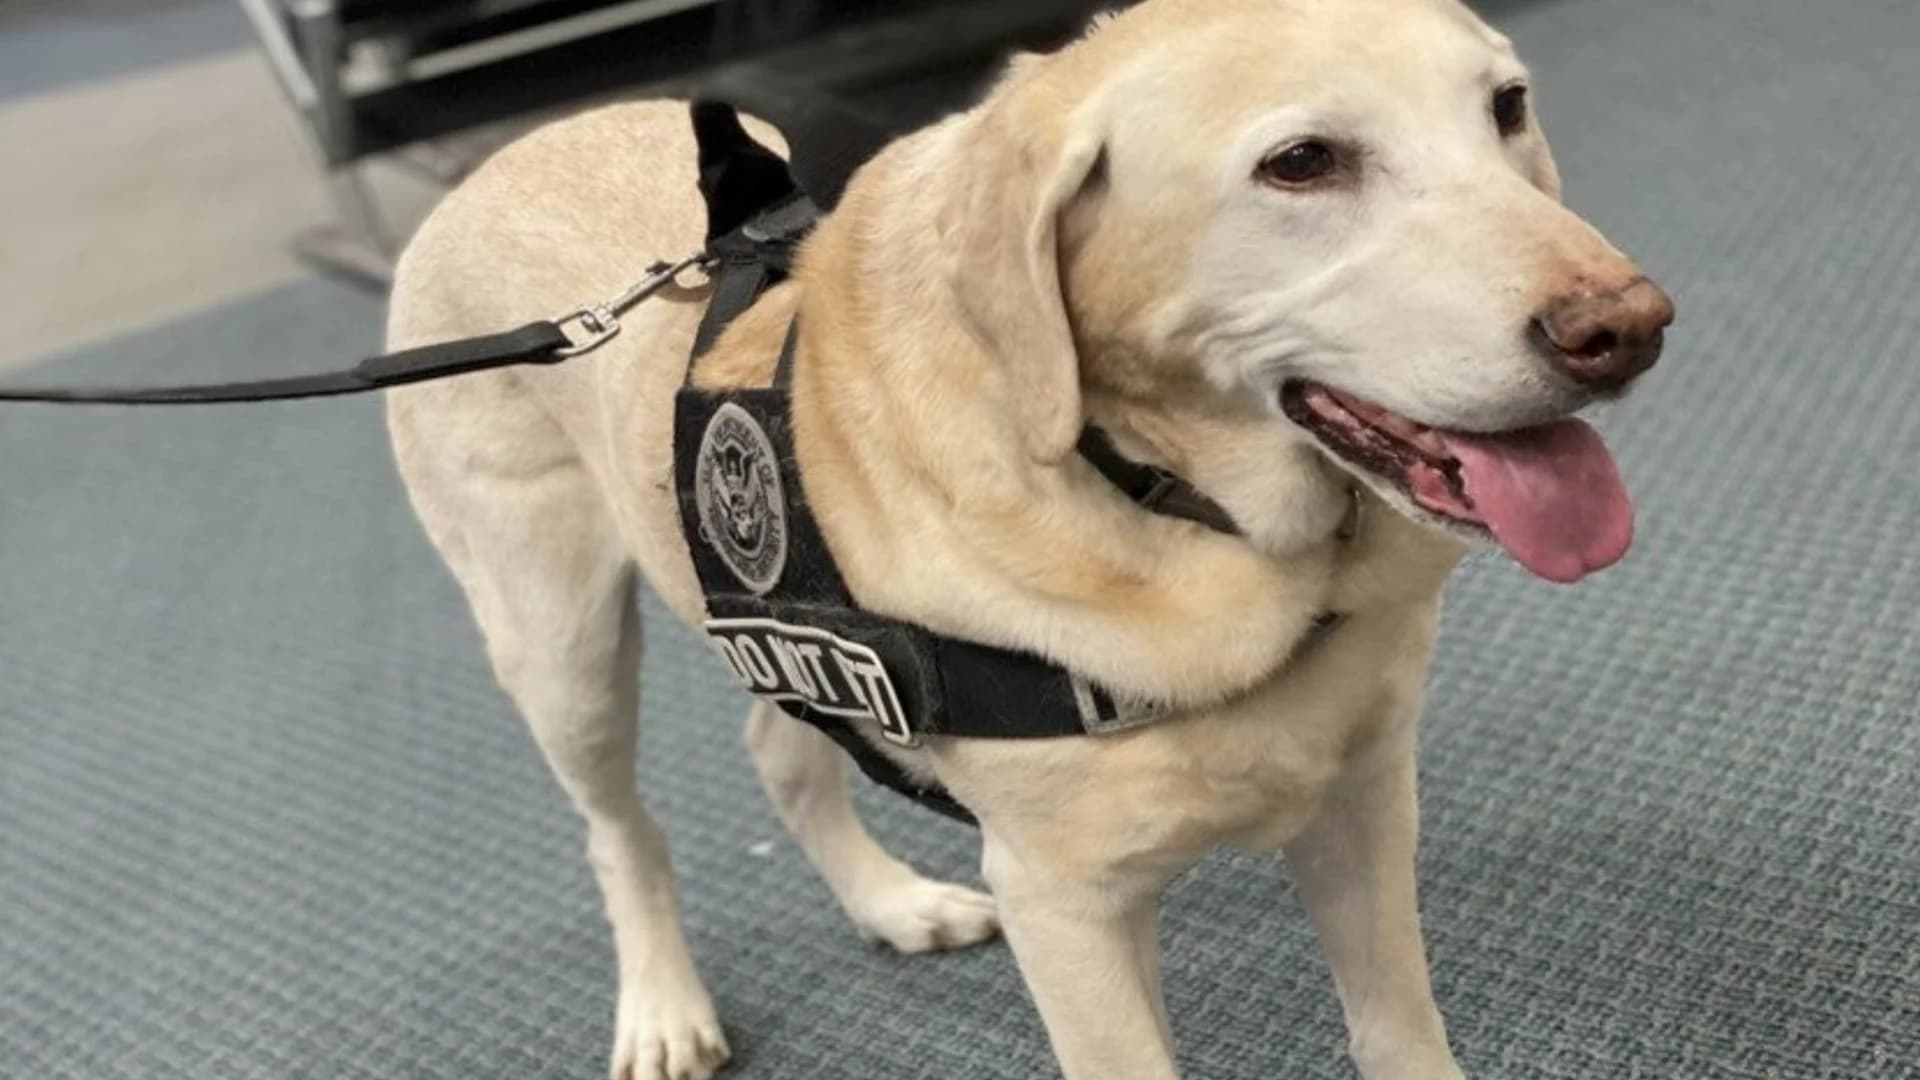 Very good dogs: Get to know TSA's explosive-detection canines